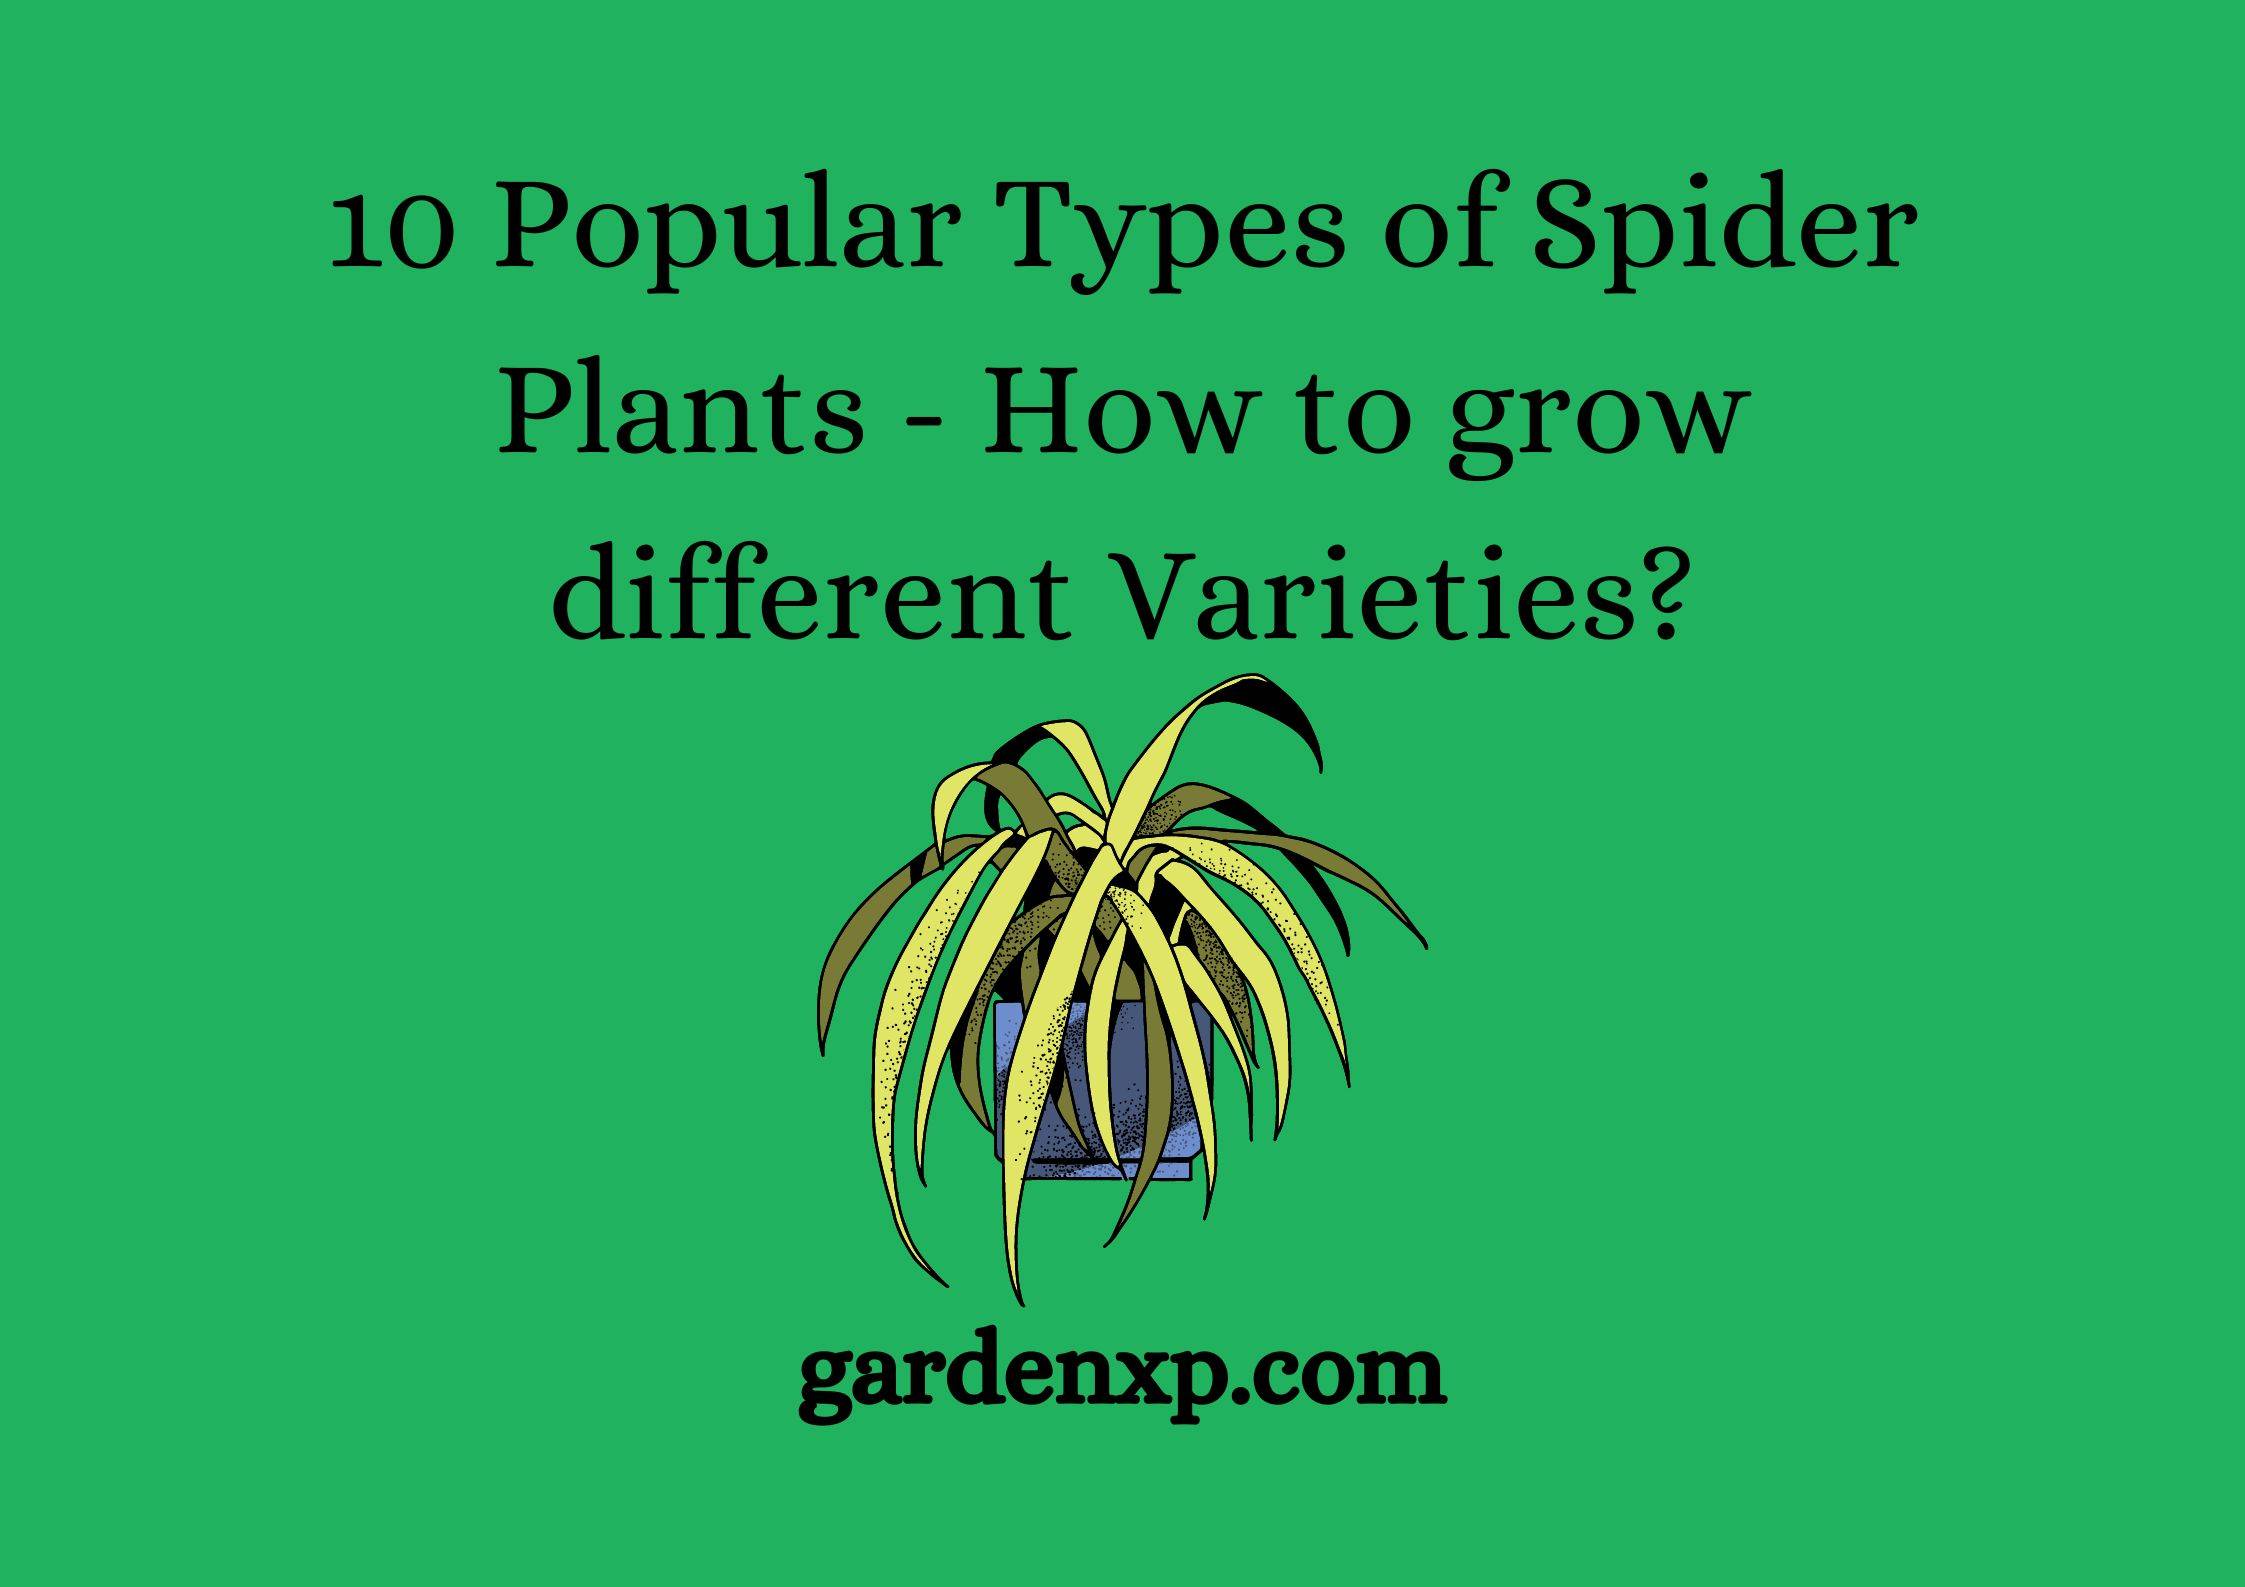 10 Popular Types of Spider Plants - How to grow different Varieties?